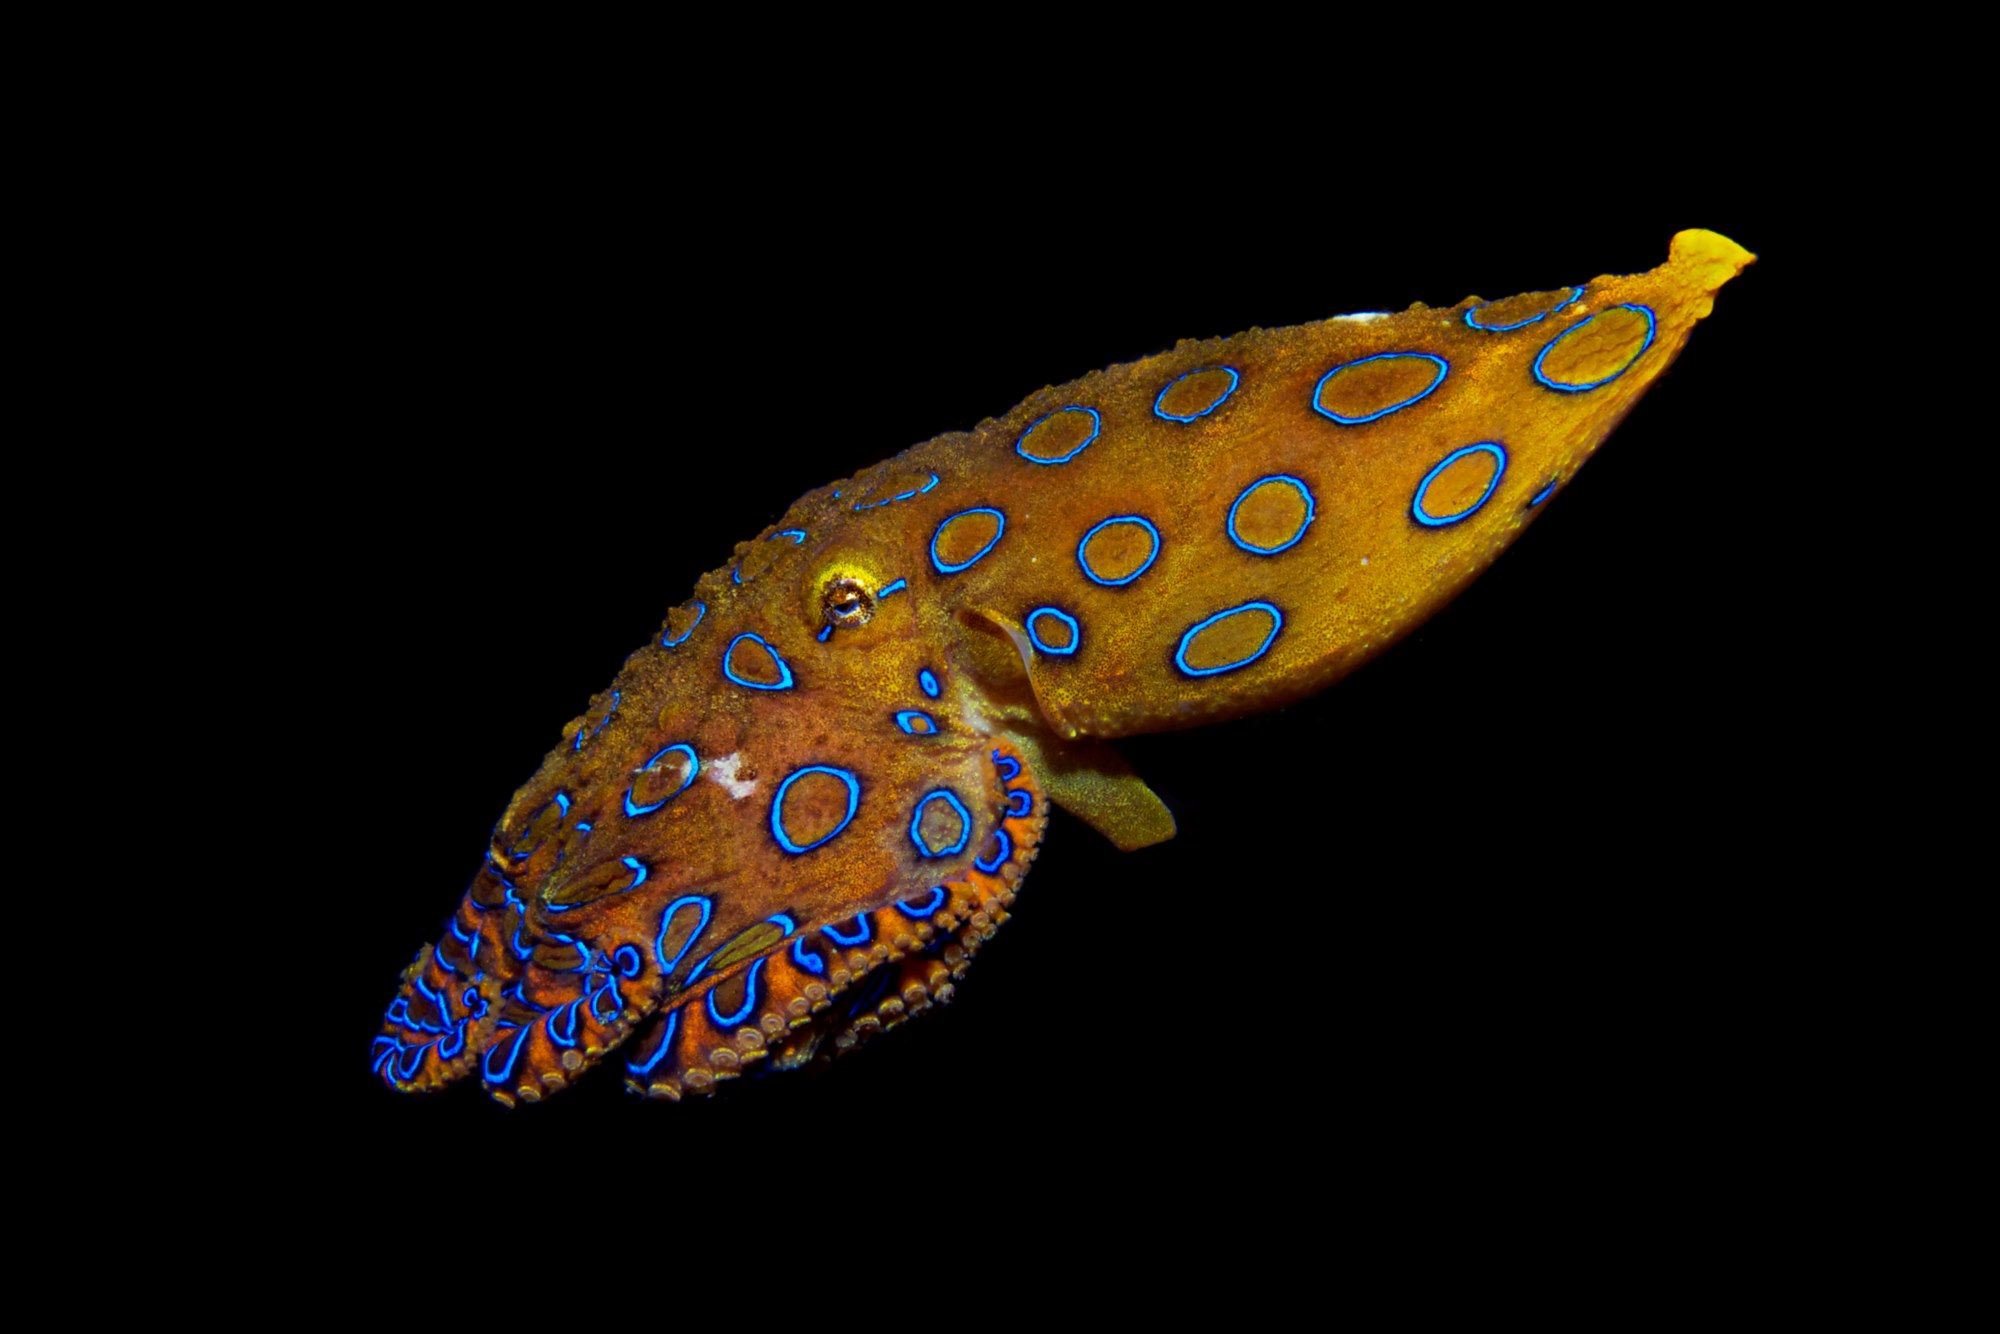 A picture of a blue-ringed octopus swimming, with a black background